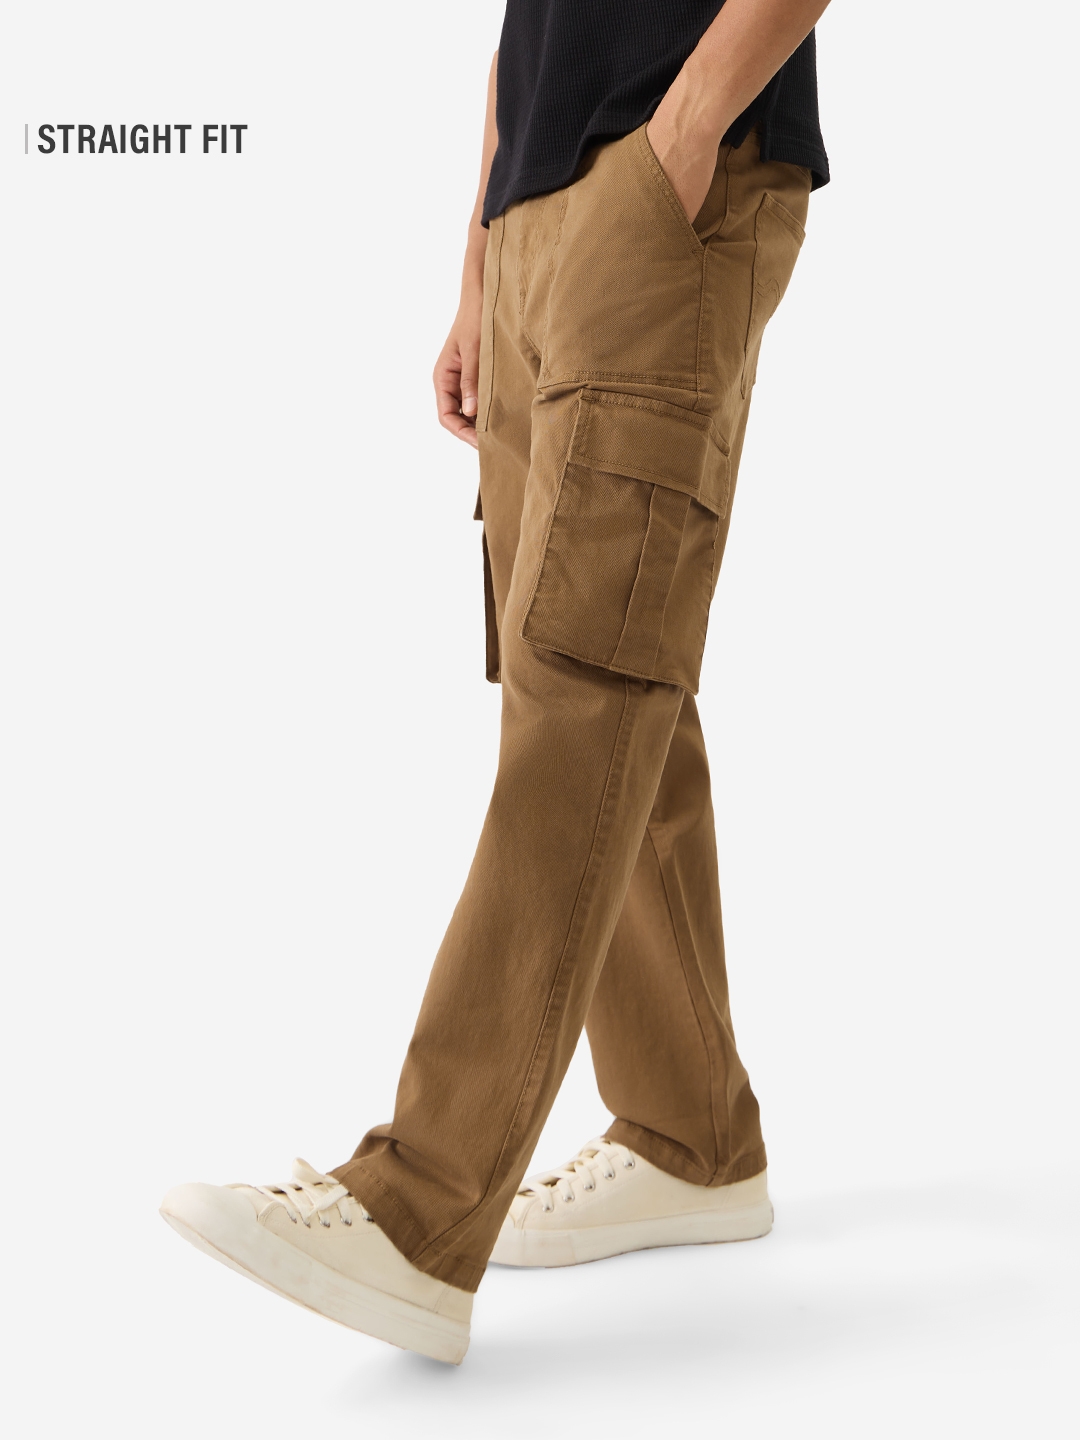 The Souled Store | Men's Solids Camel Cargo Jeans